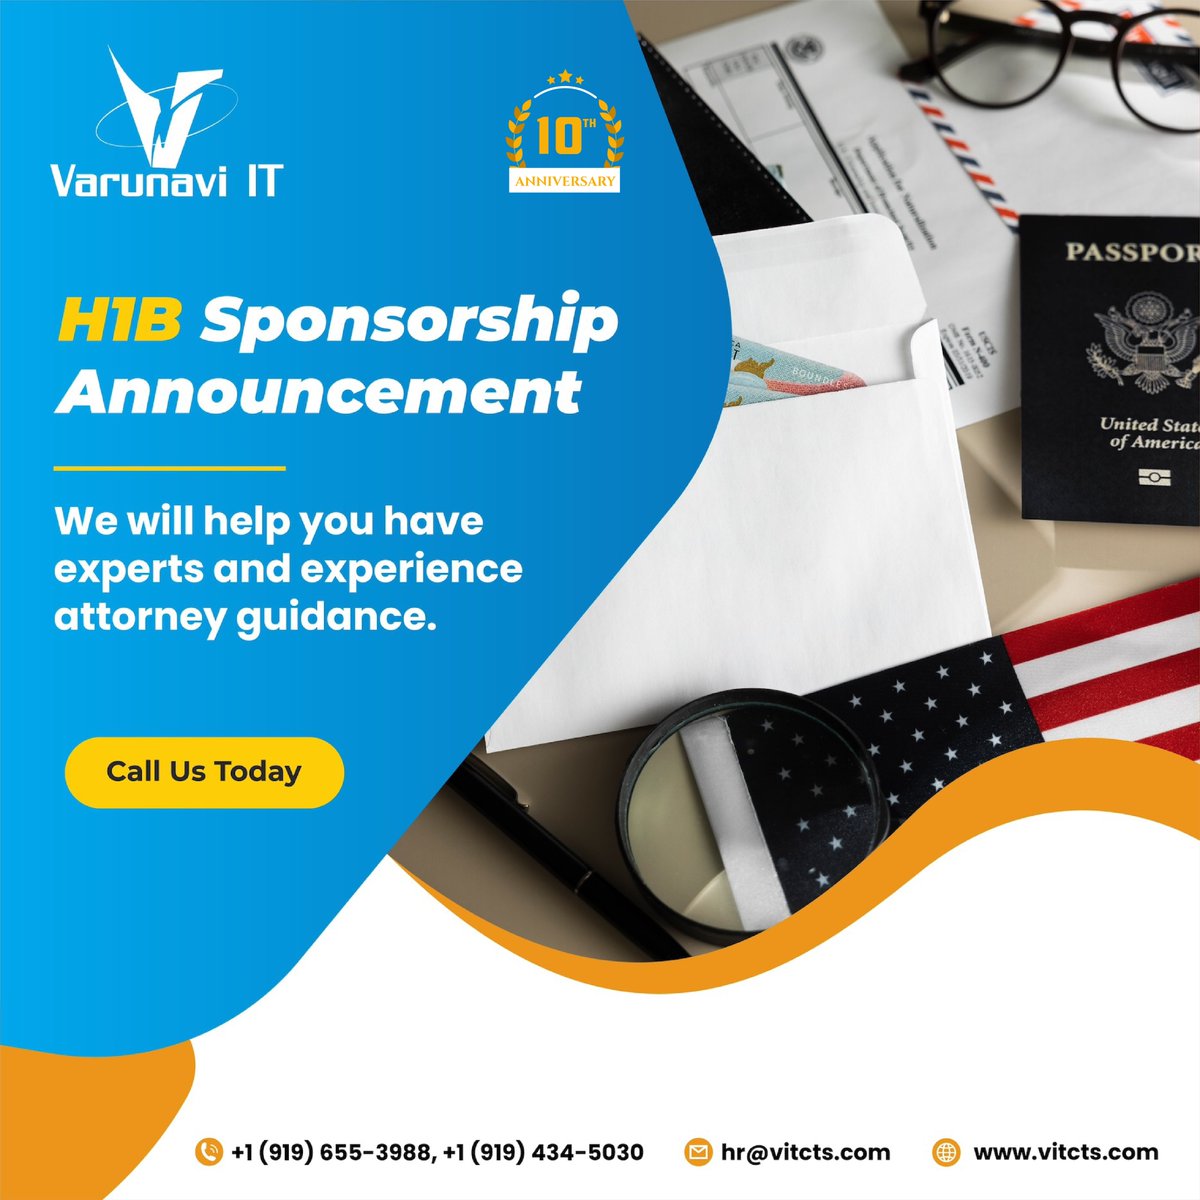 Start your registration process with us and experience comprehensive guidance throughout the process.

Call Us

#H1B #H1BVisa #H1Bsponsorship 
#vitcts 
#varunaviit
#varunaviitconsultants